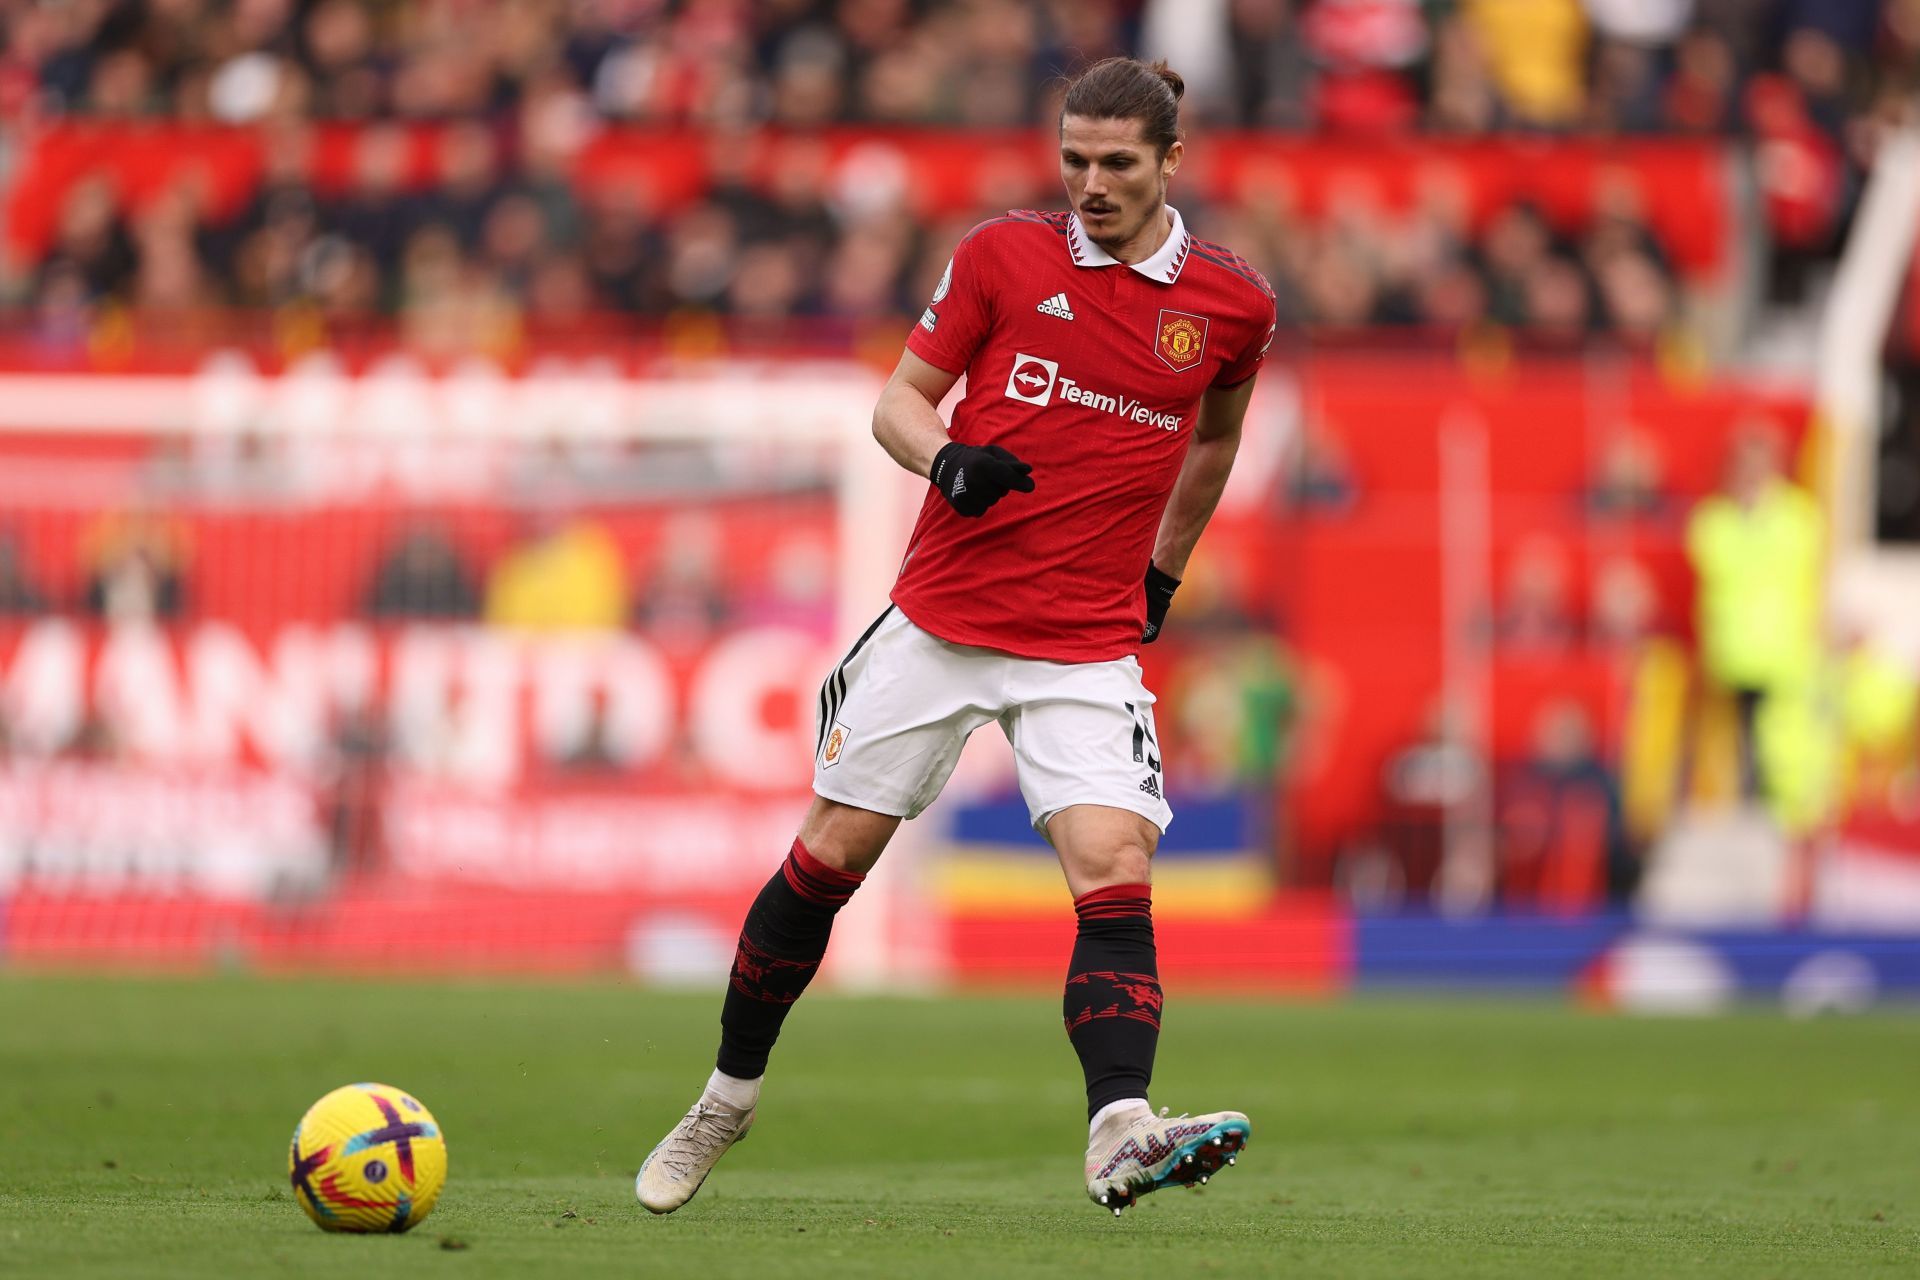 Marcel Sabitzer has become a first-team regular at Old Trafford since his move.